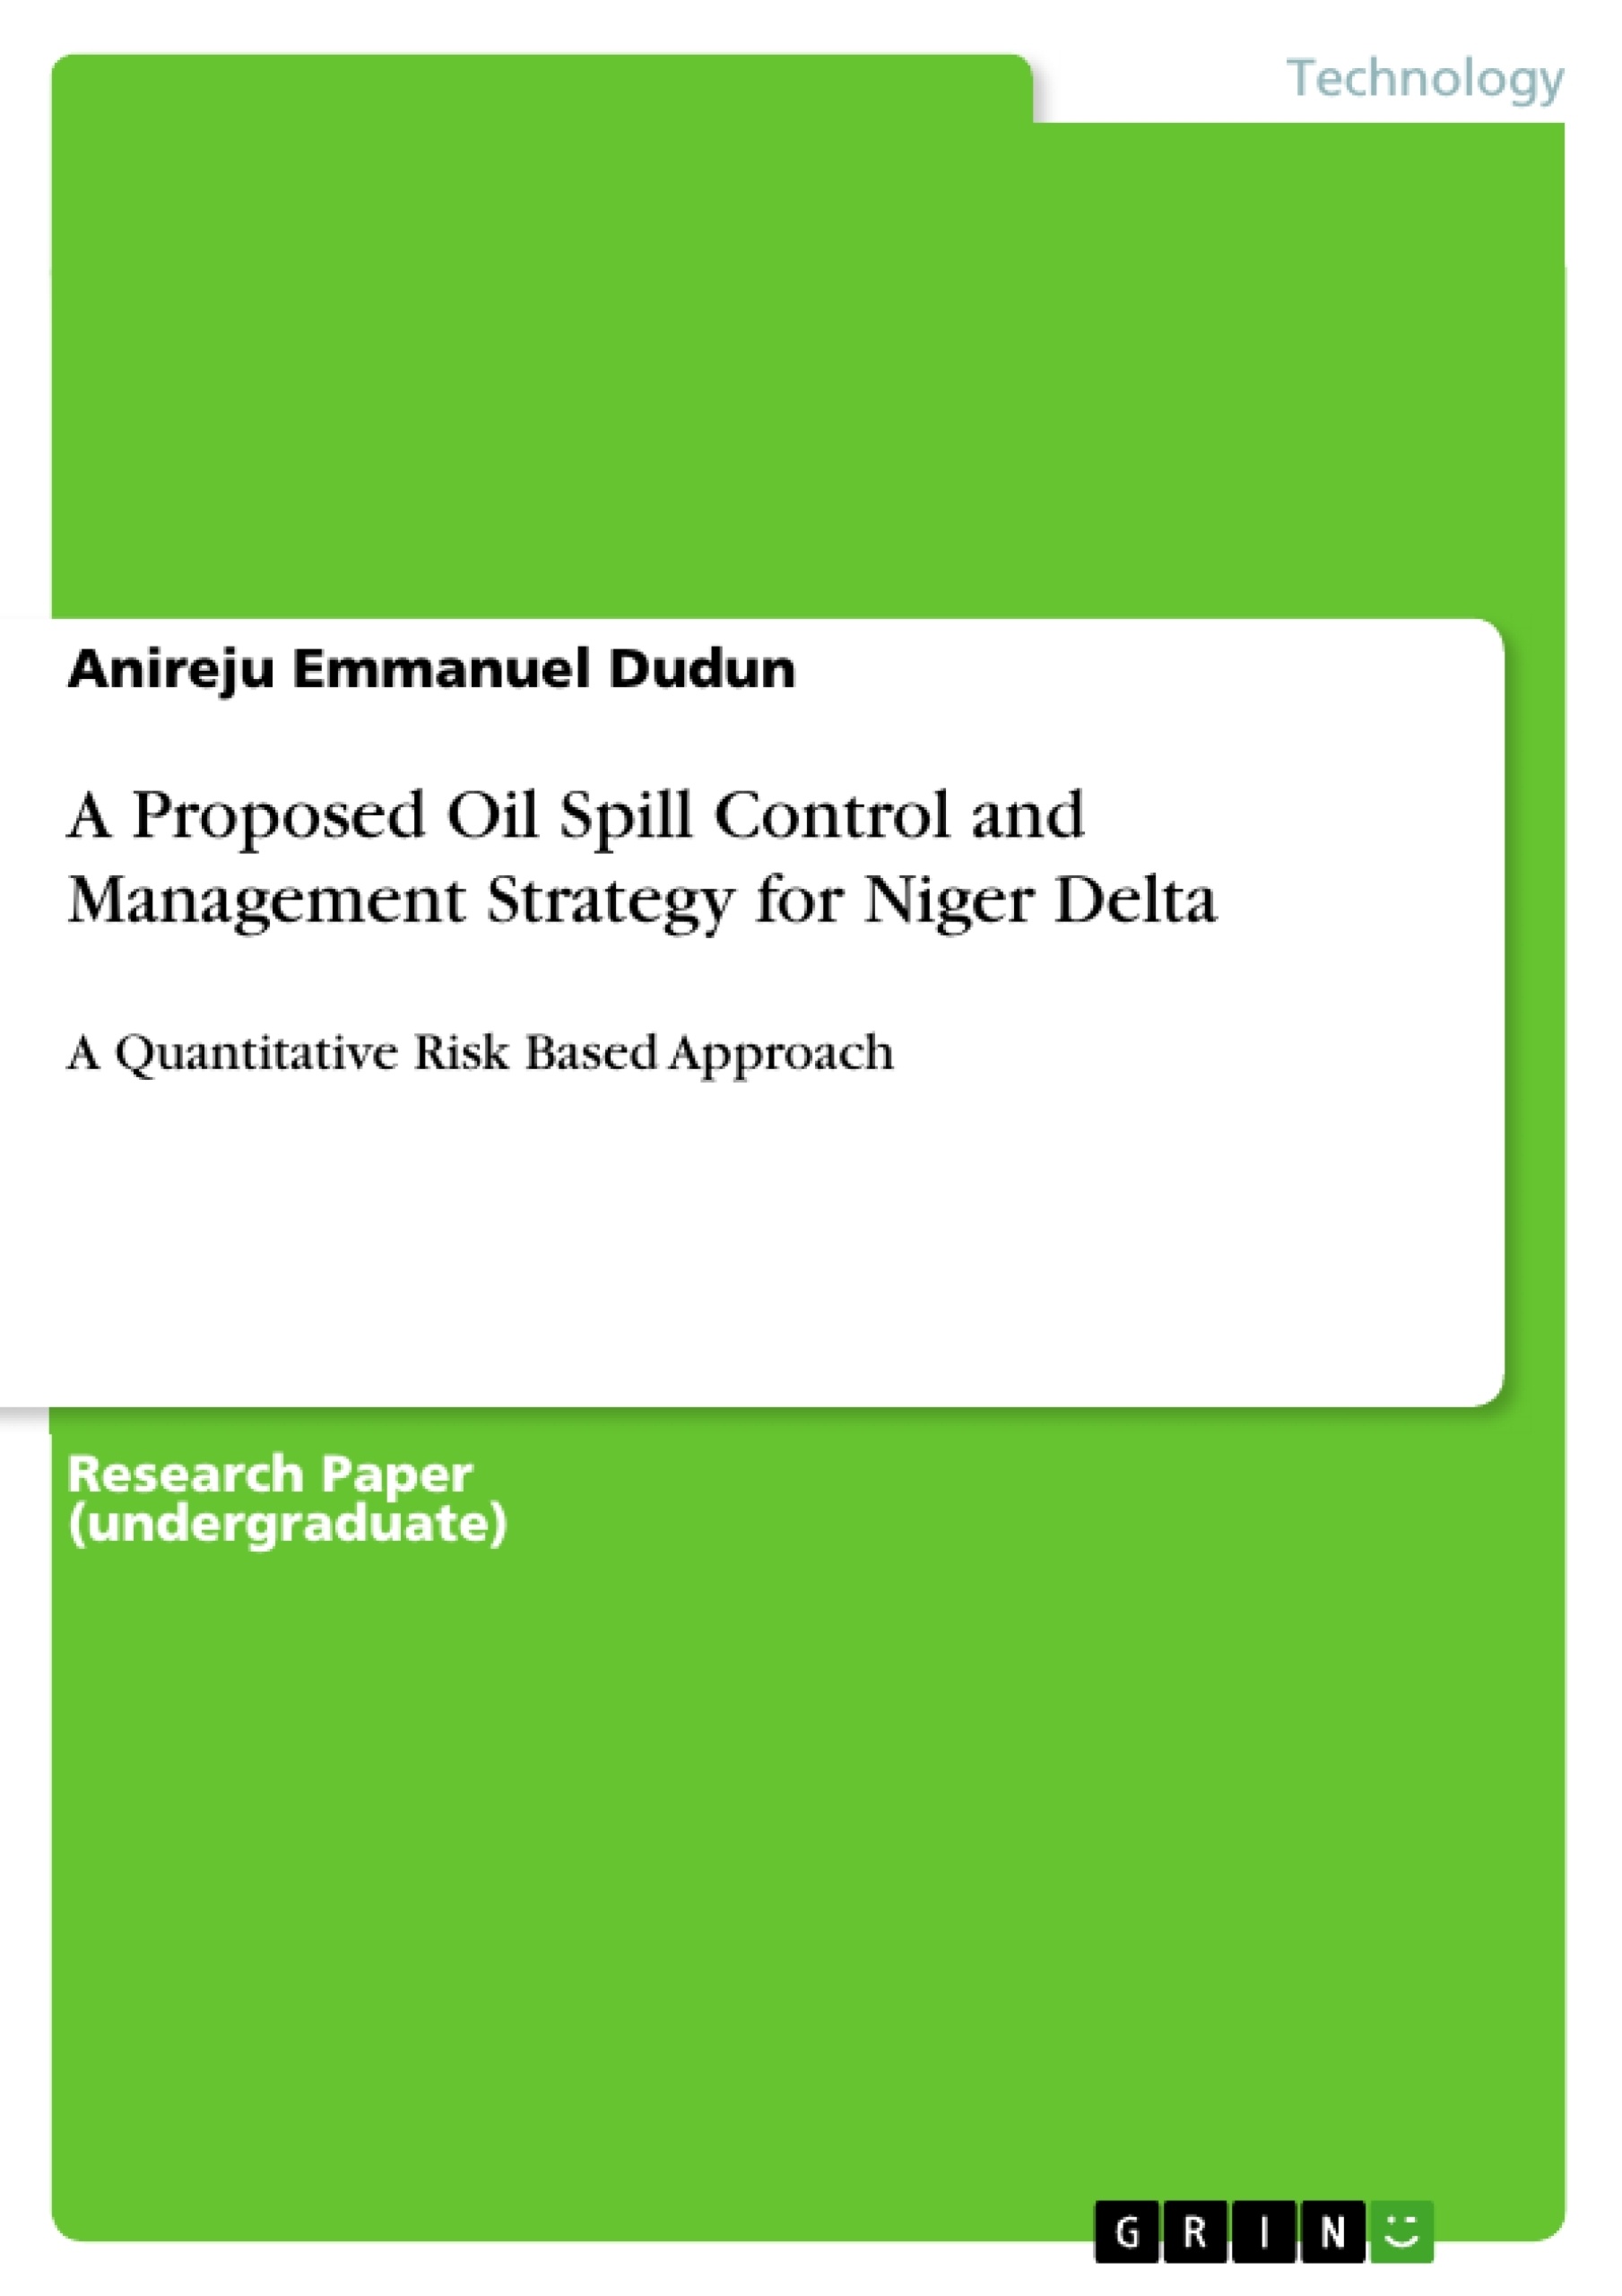 Titre: A Proposed Oil Spill Control and Management Strategy for Niger Delta